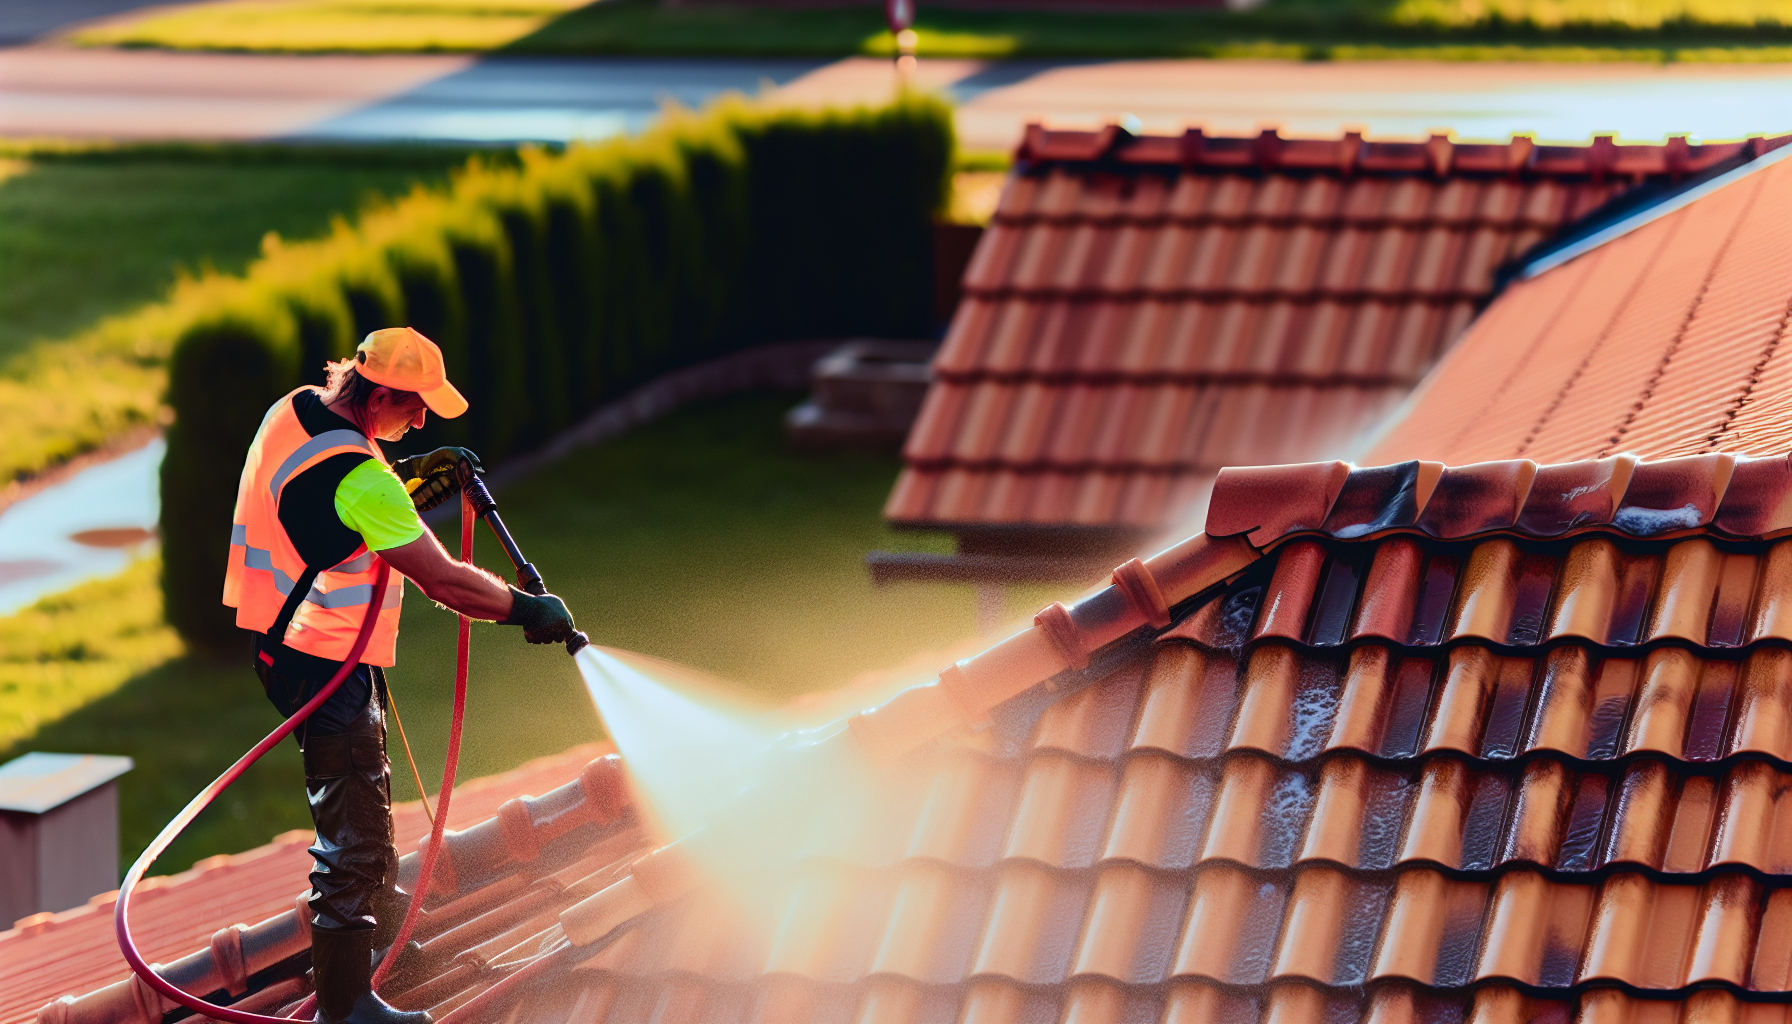 Cleaning your roof with a garden hose